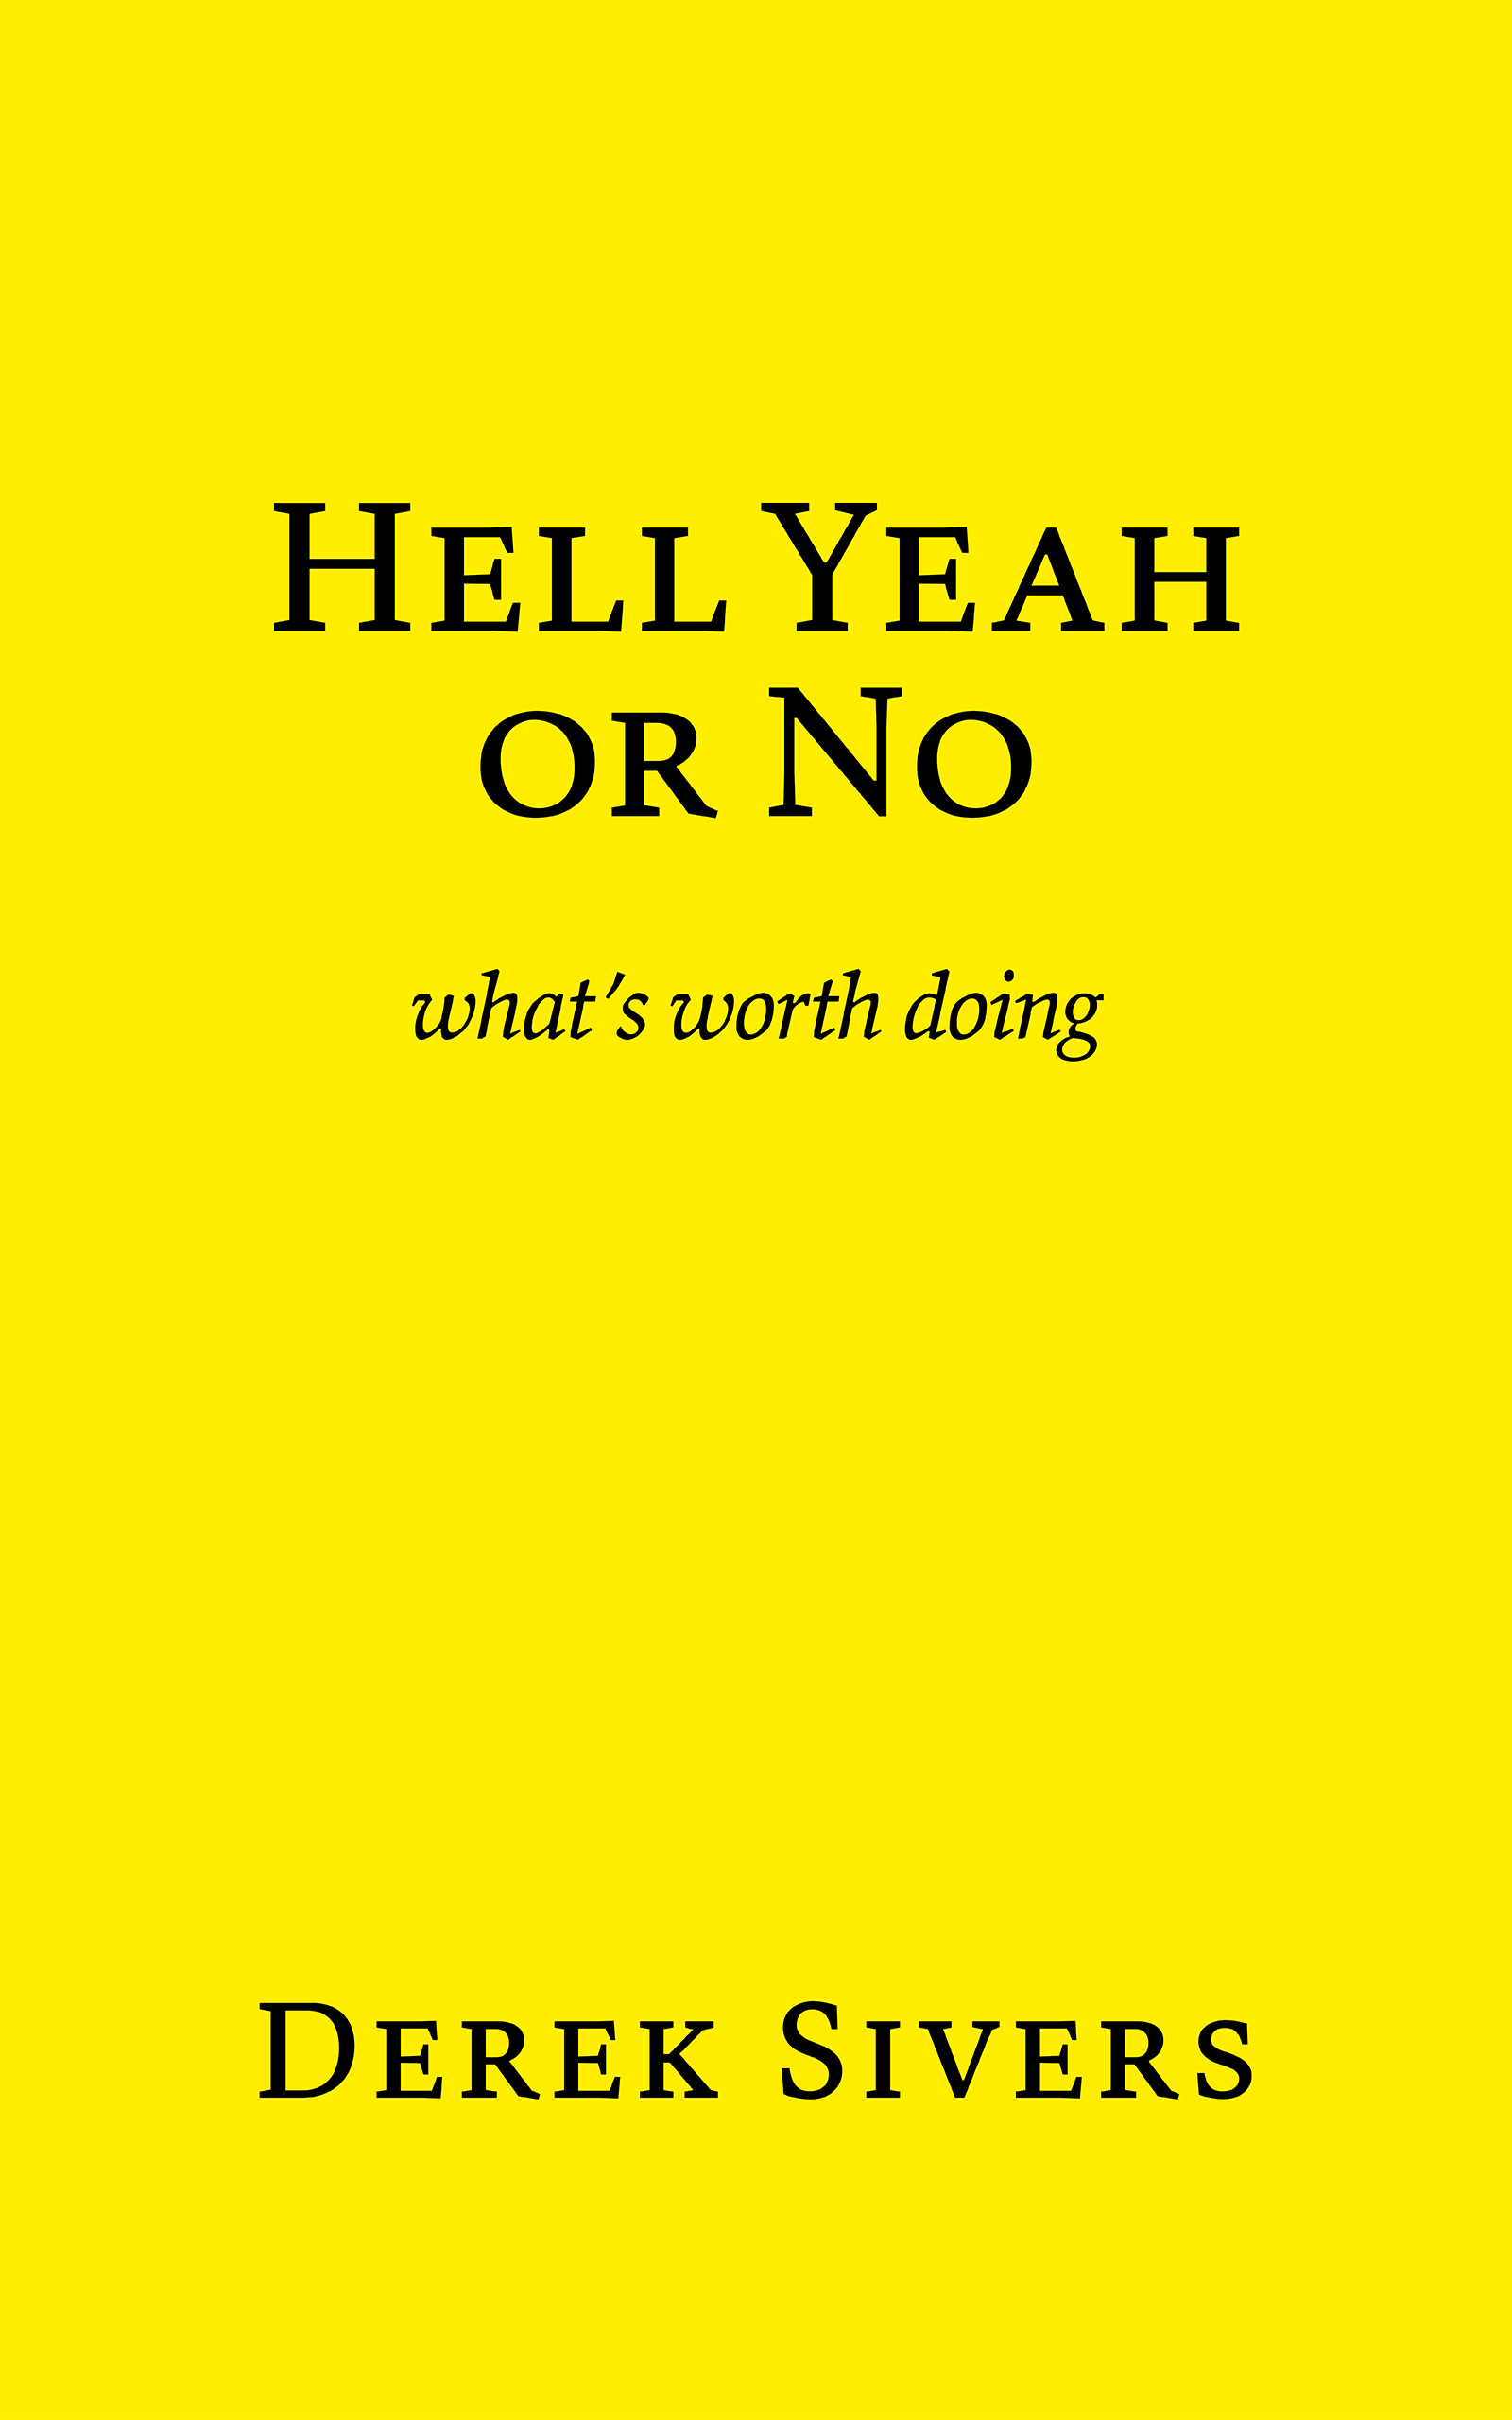 Hell Yeah Or No Derek Sivers Book Cover